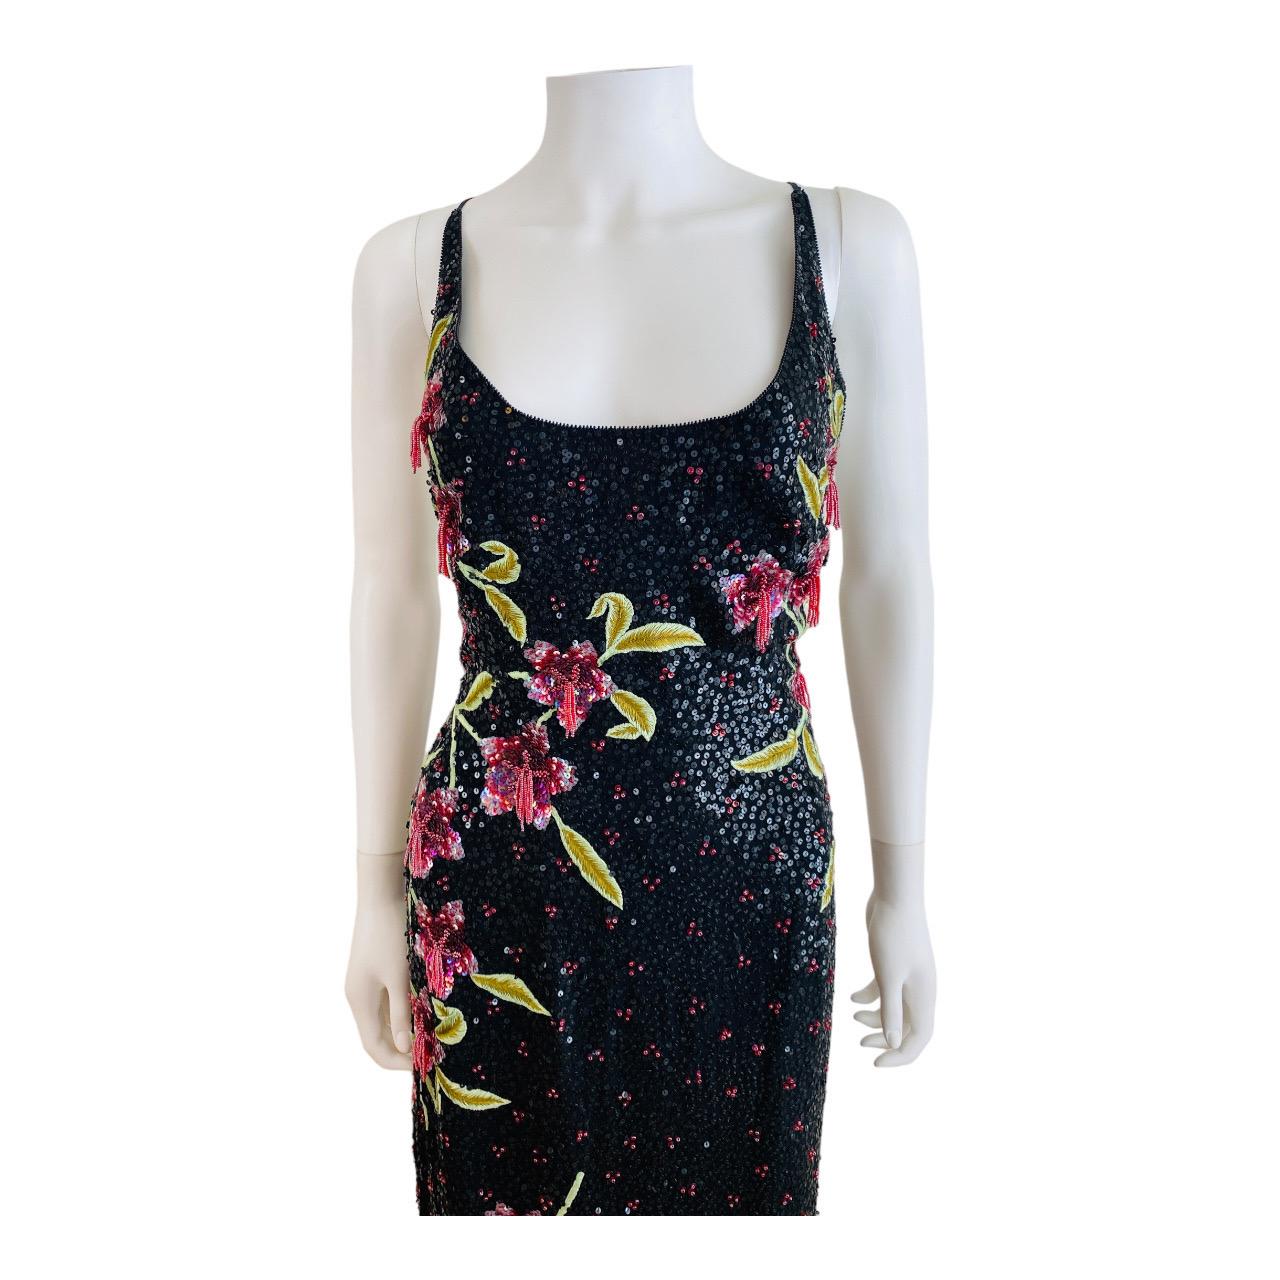 Vintage 2002 Escada Hand Beaded Sequin Floral Maxi Dress Gown Black Pink Flowers In Excellent Condition For Sale In Denver, CO